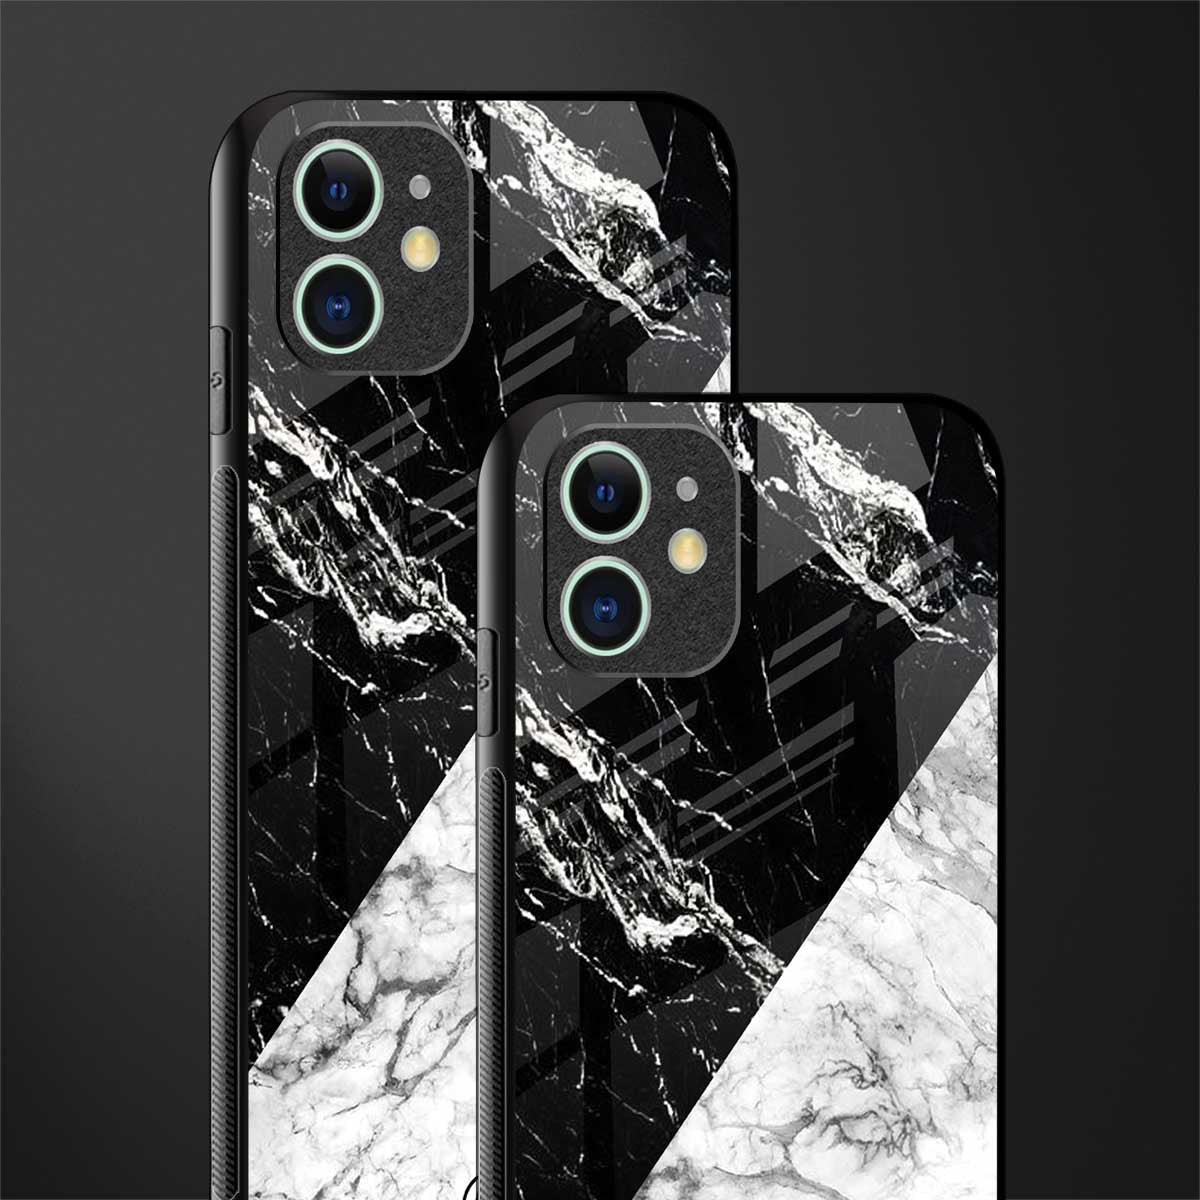 fatal contradiction phone cover for iphone 11